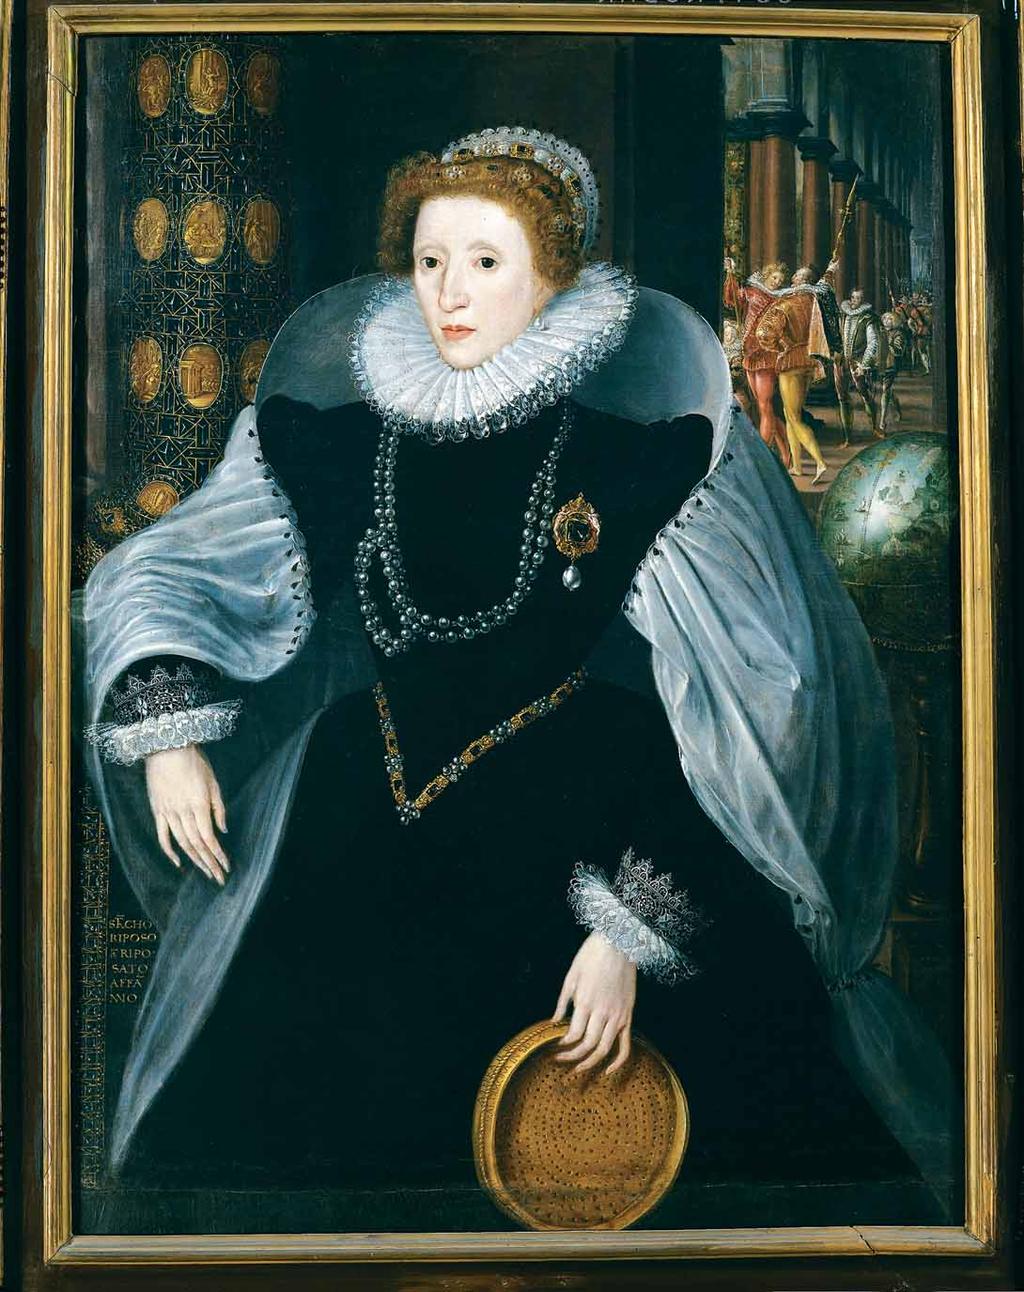 Queen Elizabeth I England's first Queen Elizabeth (1533 1603) struggled to navigate the currents of an extremely